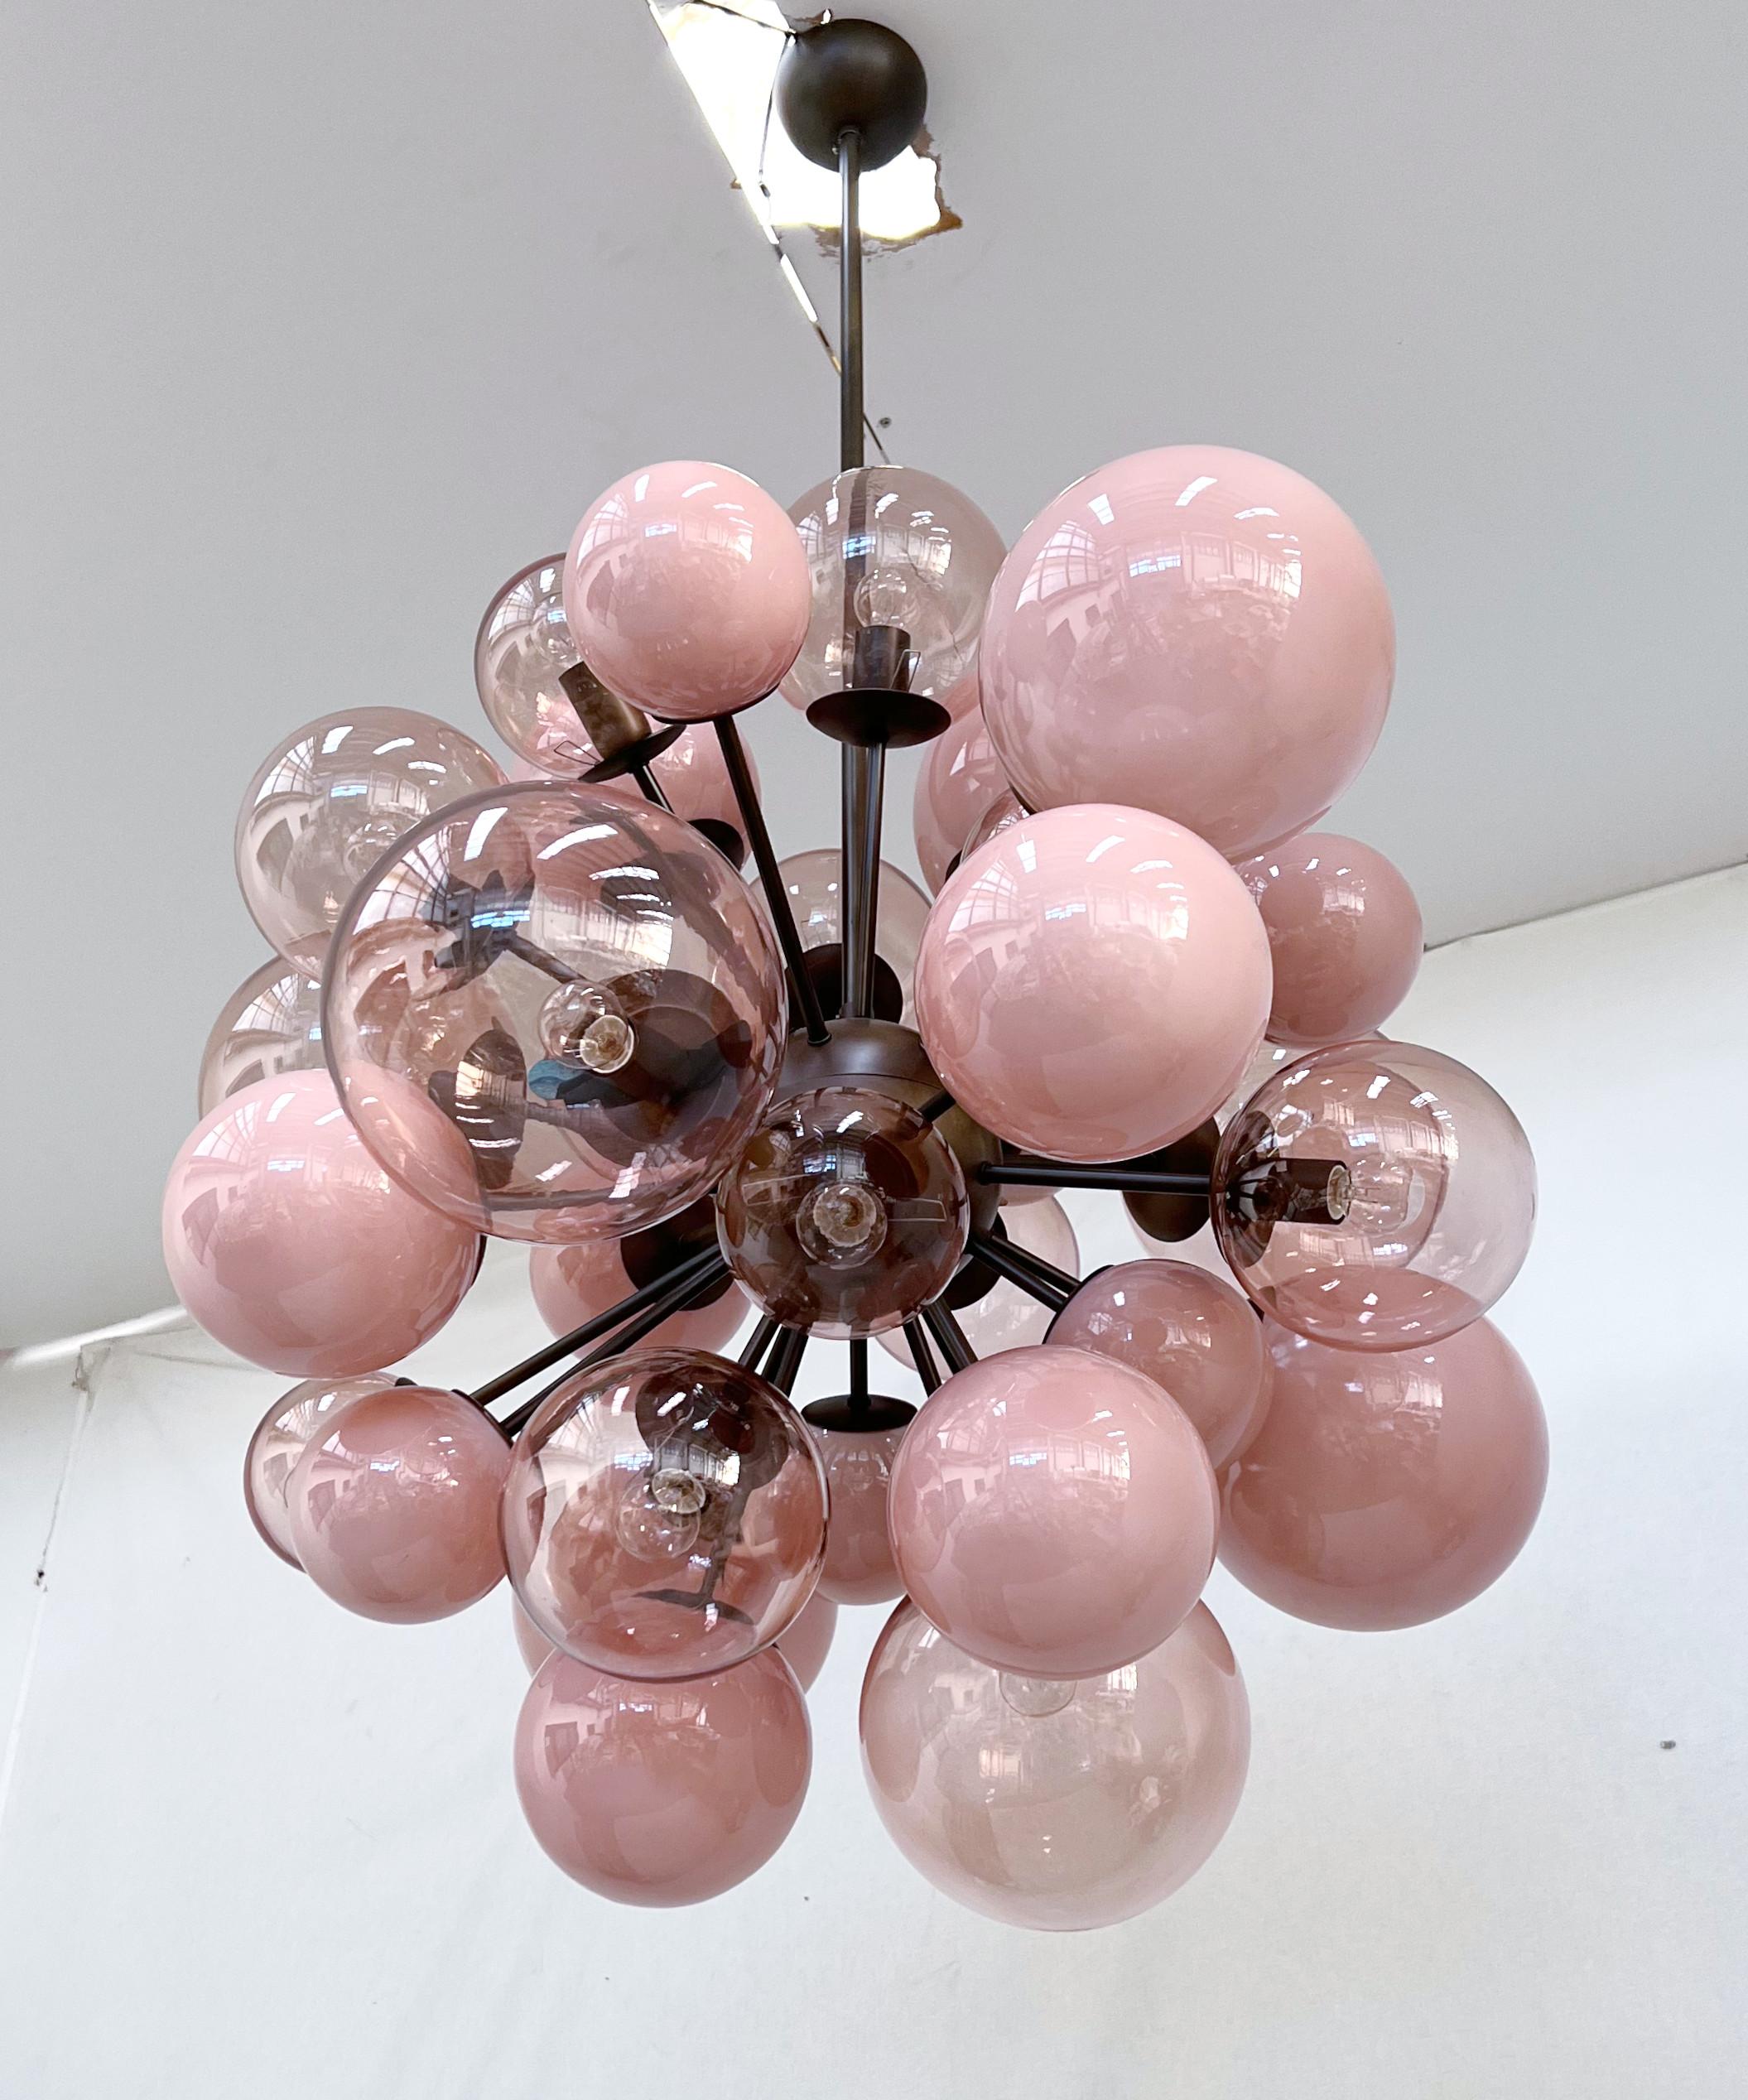 Italian sputnik chandelier with varied 32 Murano glass globes in opaque and transparent pink coral colors, mounted on bronze finish frame / Designed by Fabio Bergomi for Fabio Ltd / Made in Italy
32 lights / E12 or E14 type / max 40W